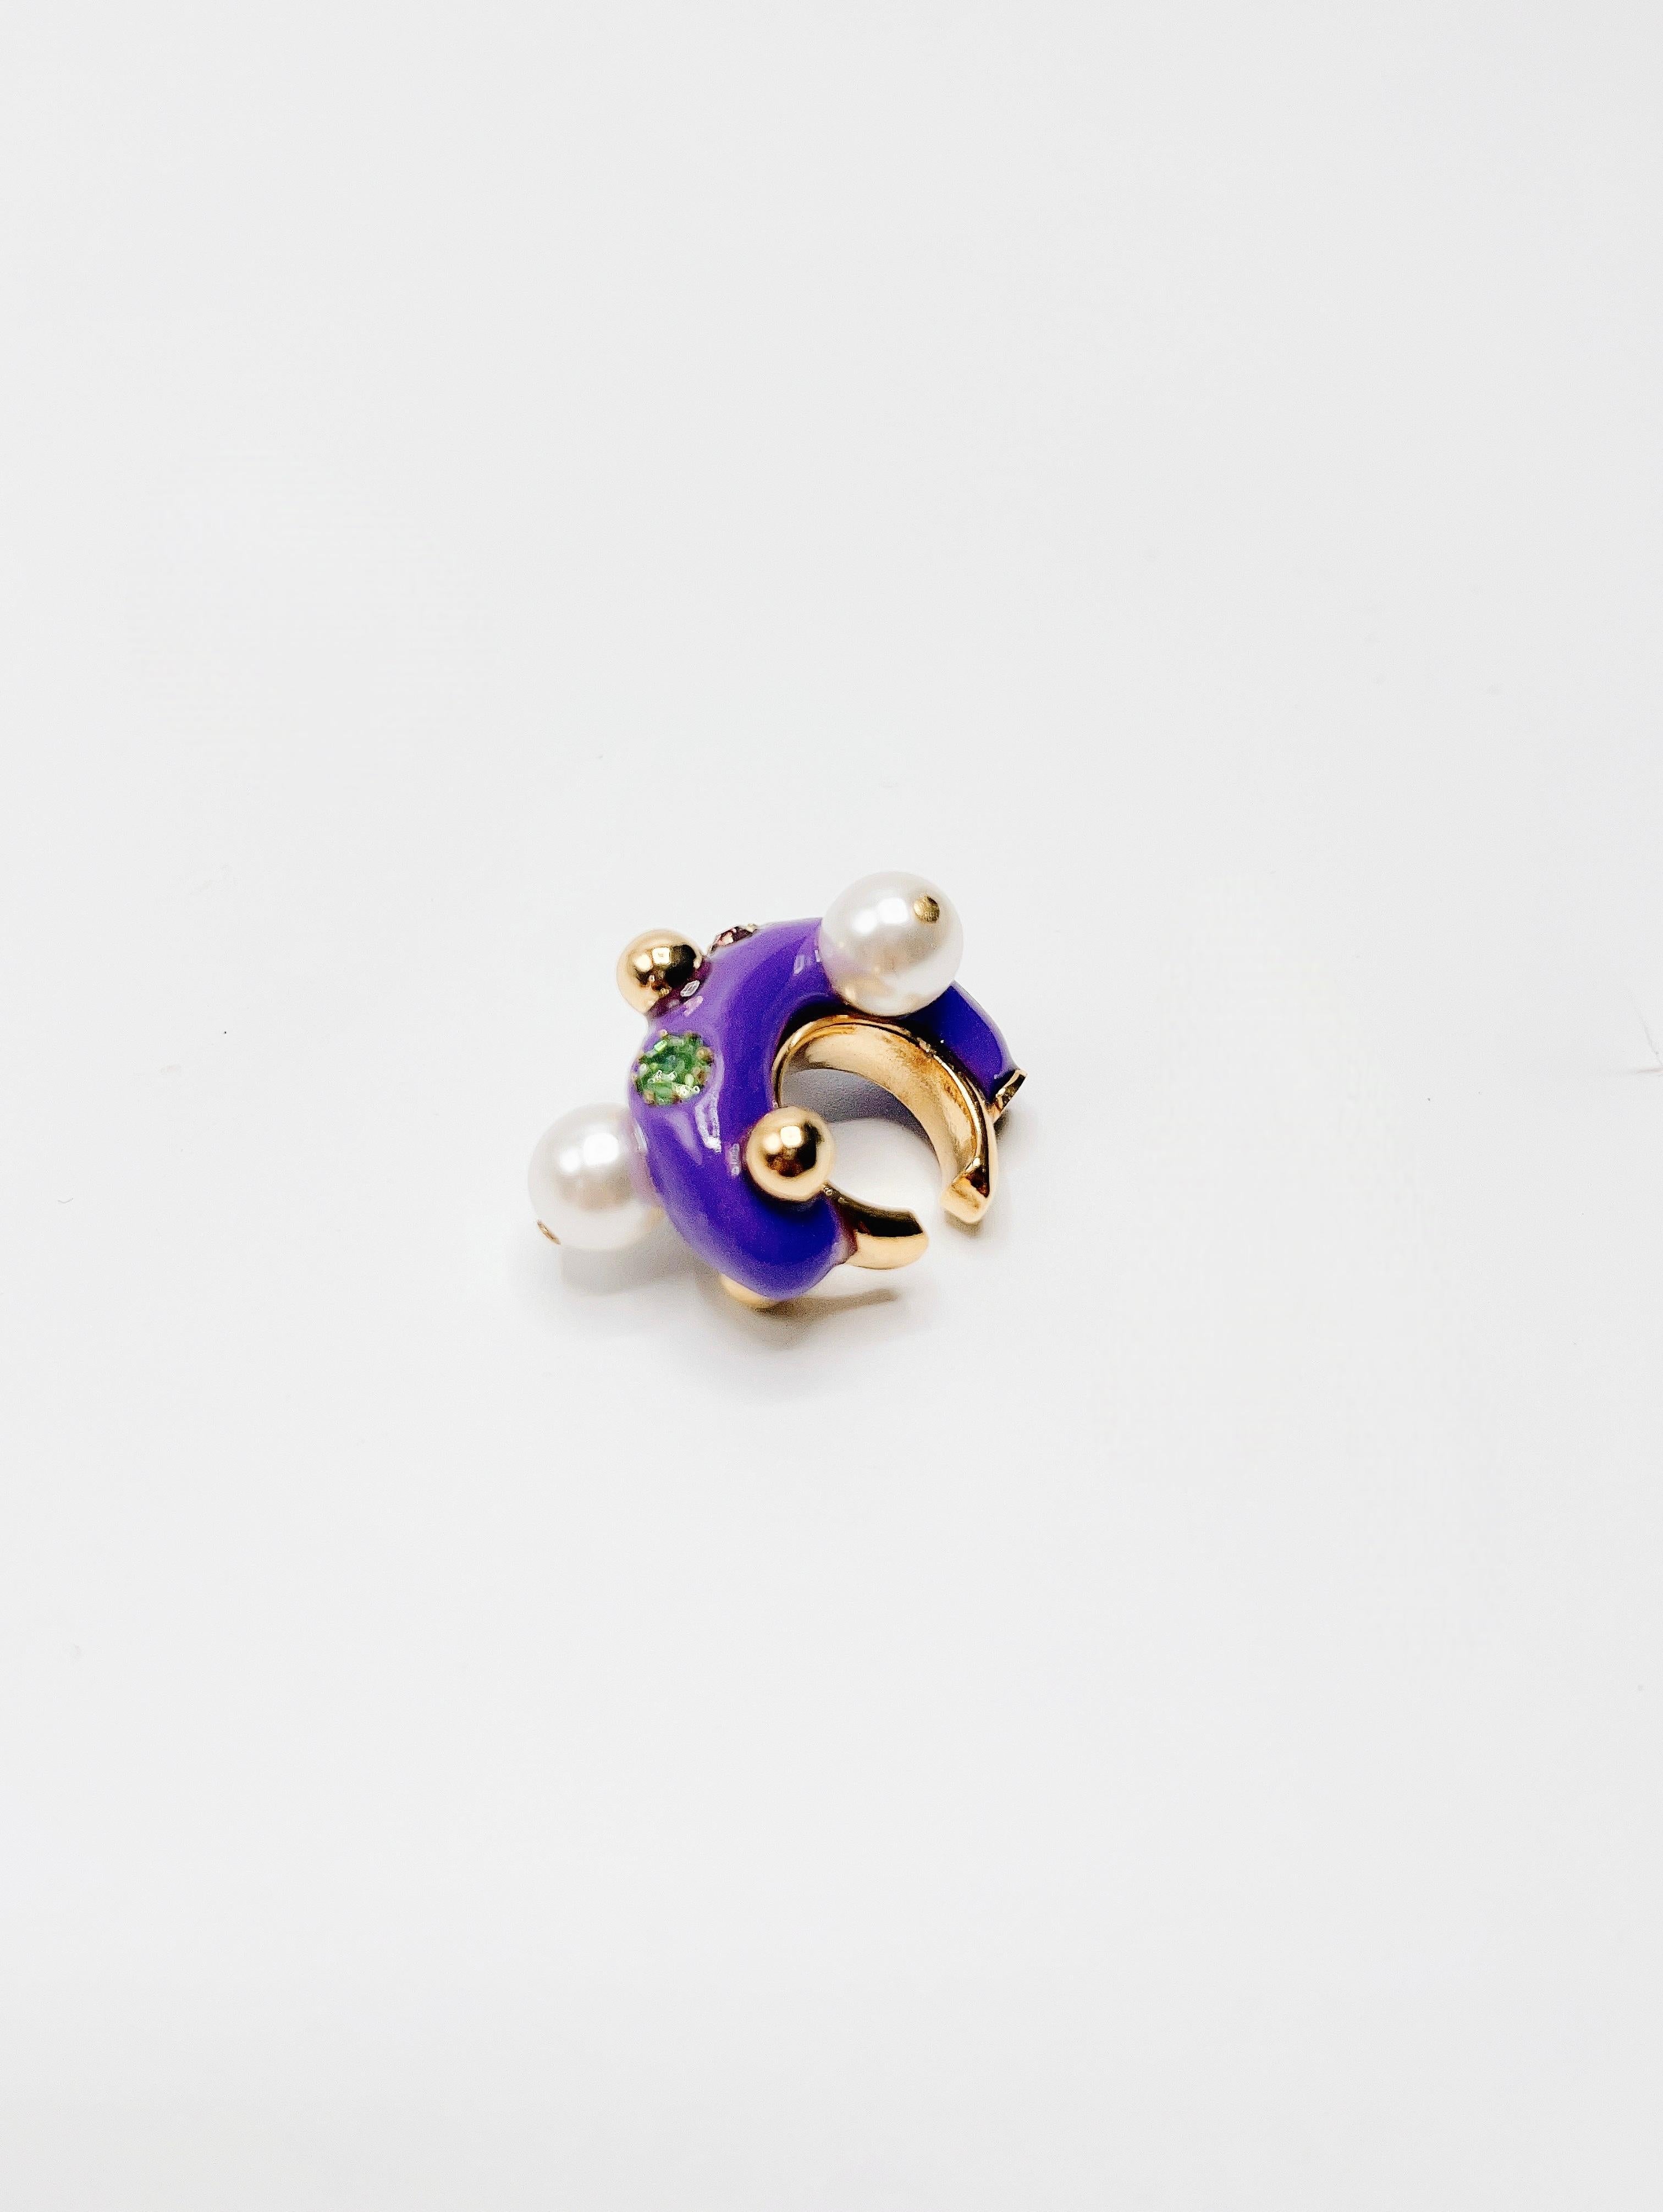 Arts and Crafts TEARDROPS in a Diary, No. 2_in Purple_Hand crafted ear cuff For Sale